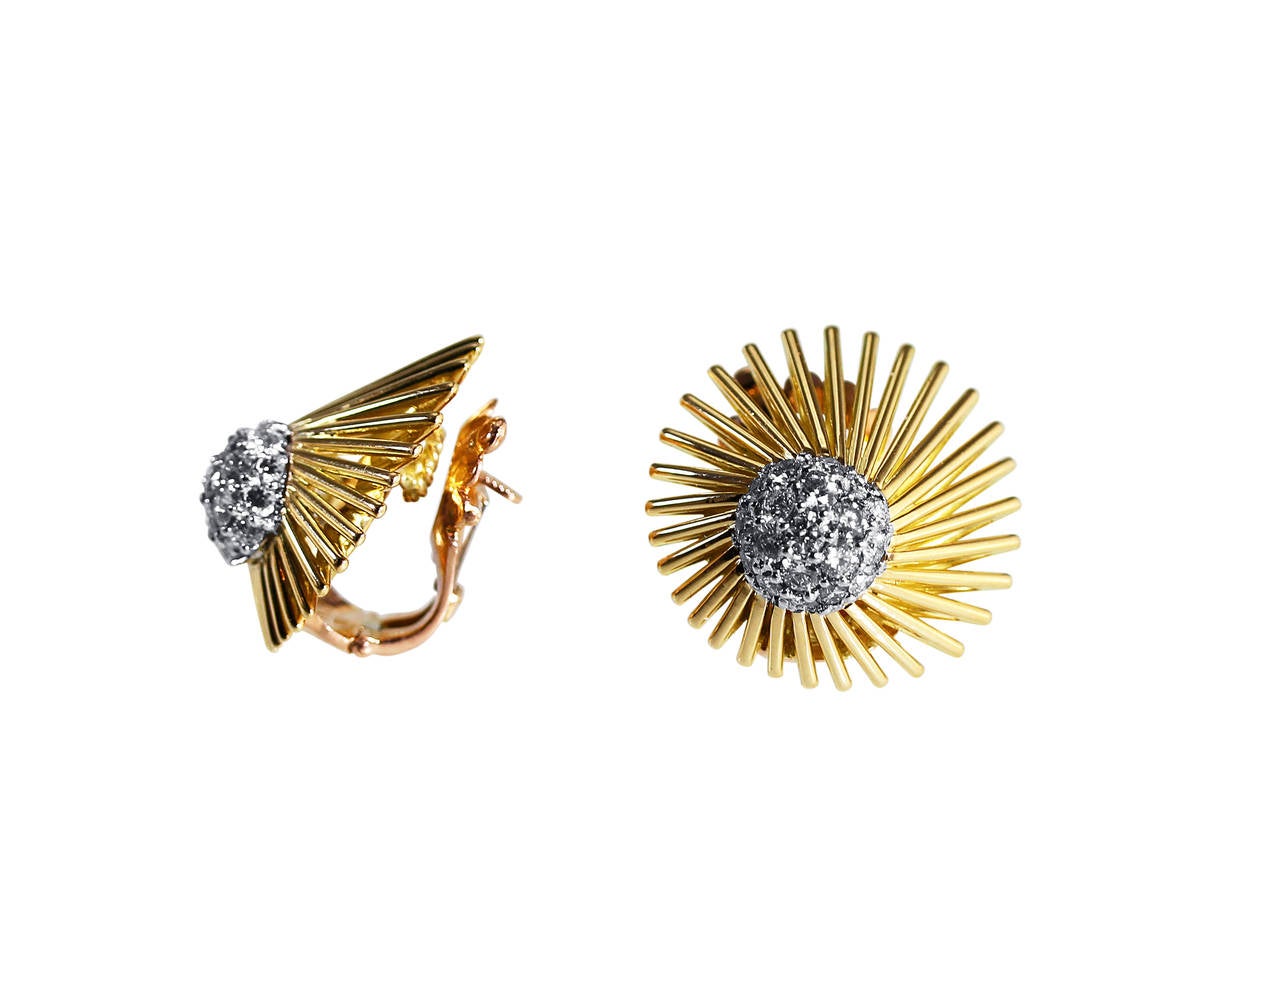 A pair of 18 karat yellow gold, platinum and diamond Meteor earclips by Van Cleef & Arpels, France, designed as sunburst of polished gold tendrils set in the center with bombe plaques set throughout with 38 round diamonds weighing approximately 1.50